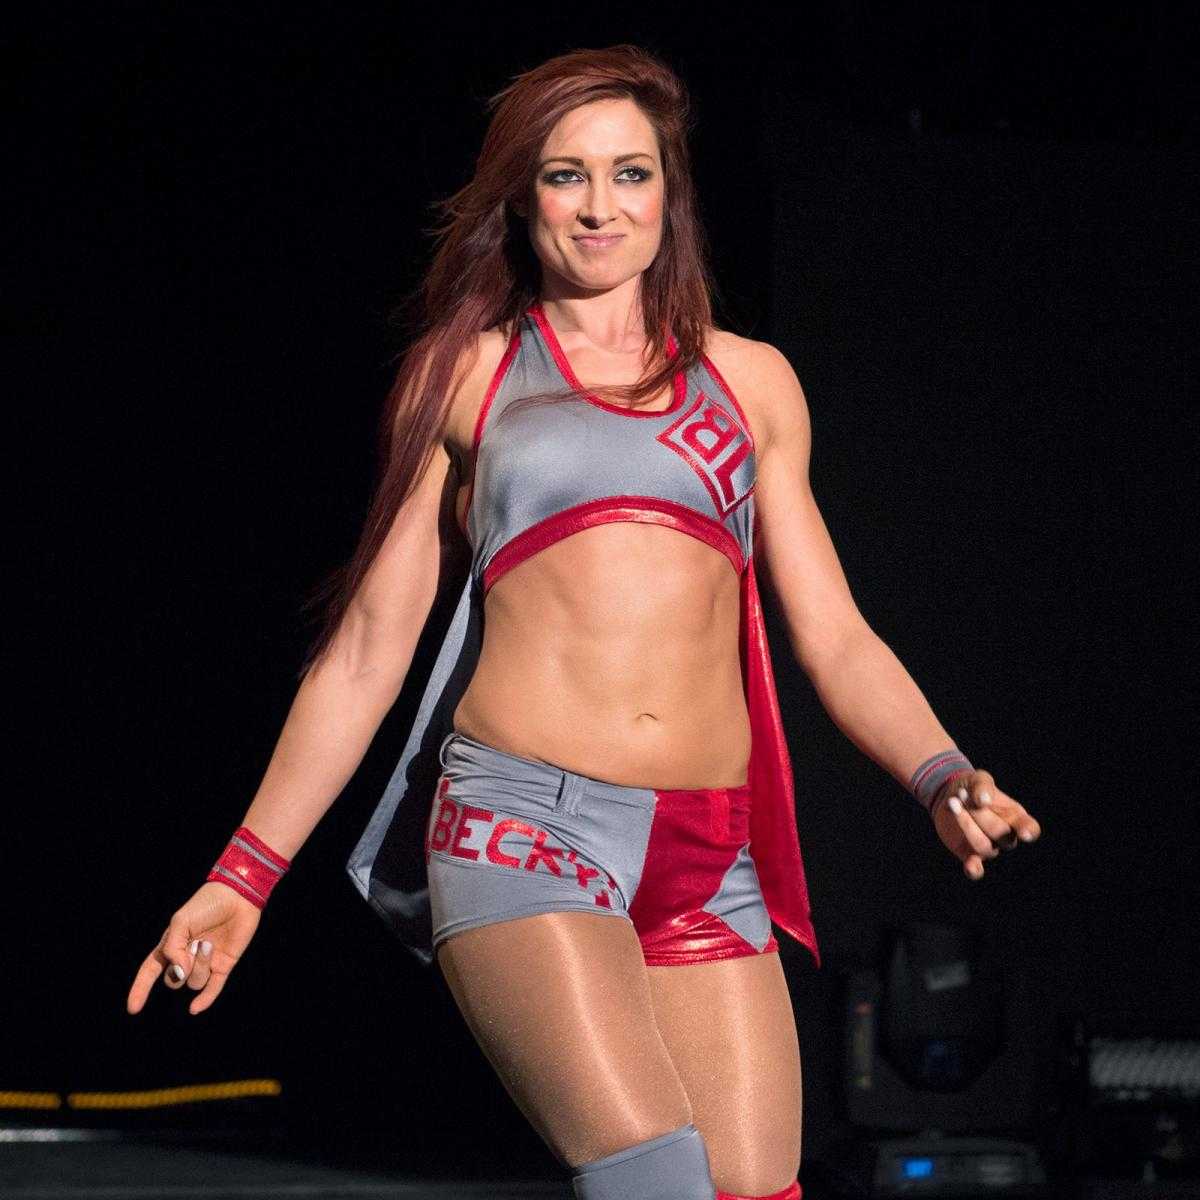 70+ Hot And Sexy Pictures of Becky Lynch – WWE Diva Will Sizzle You Up 2